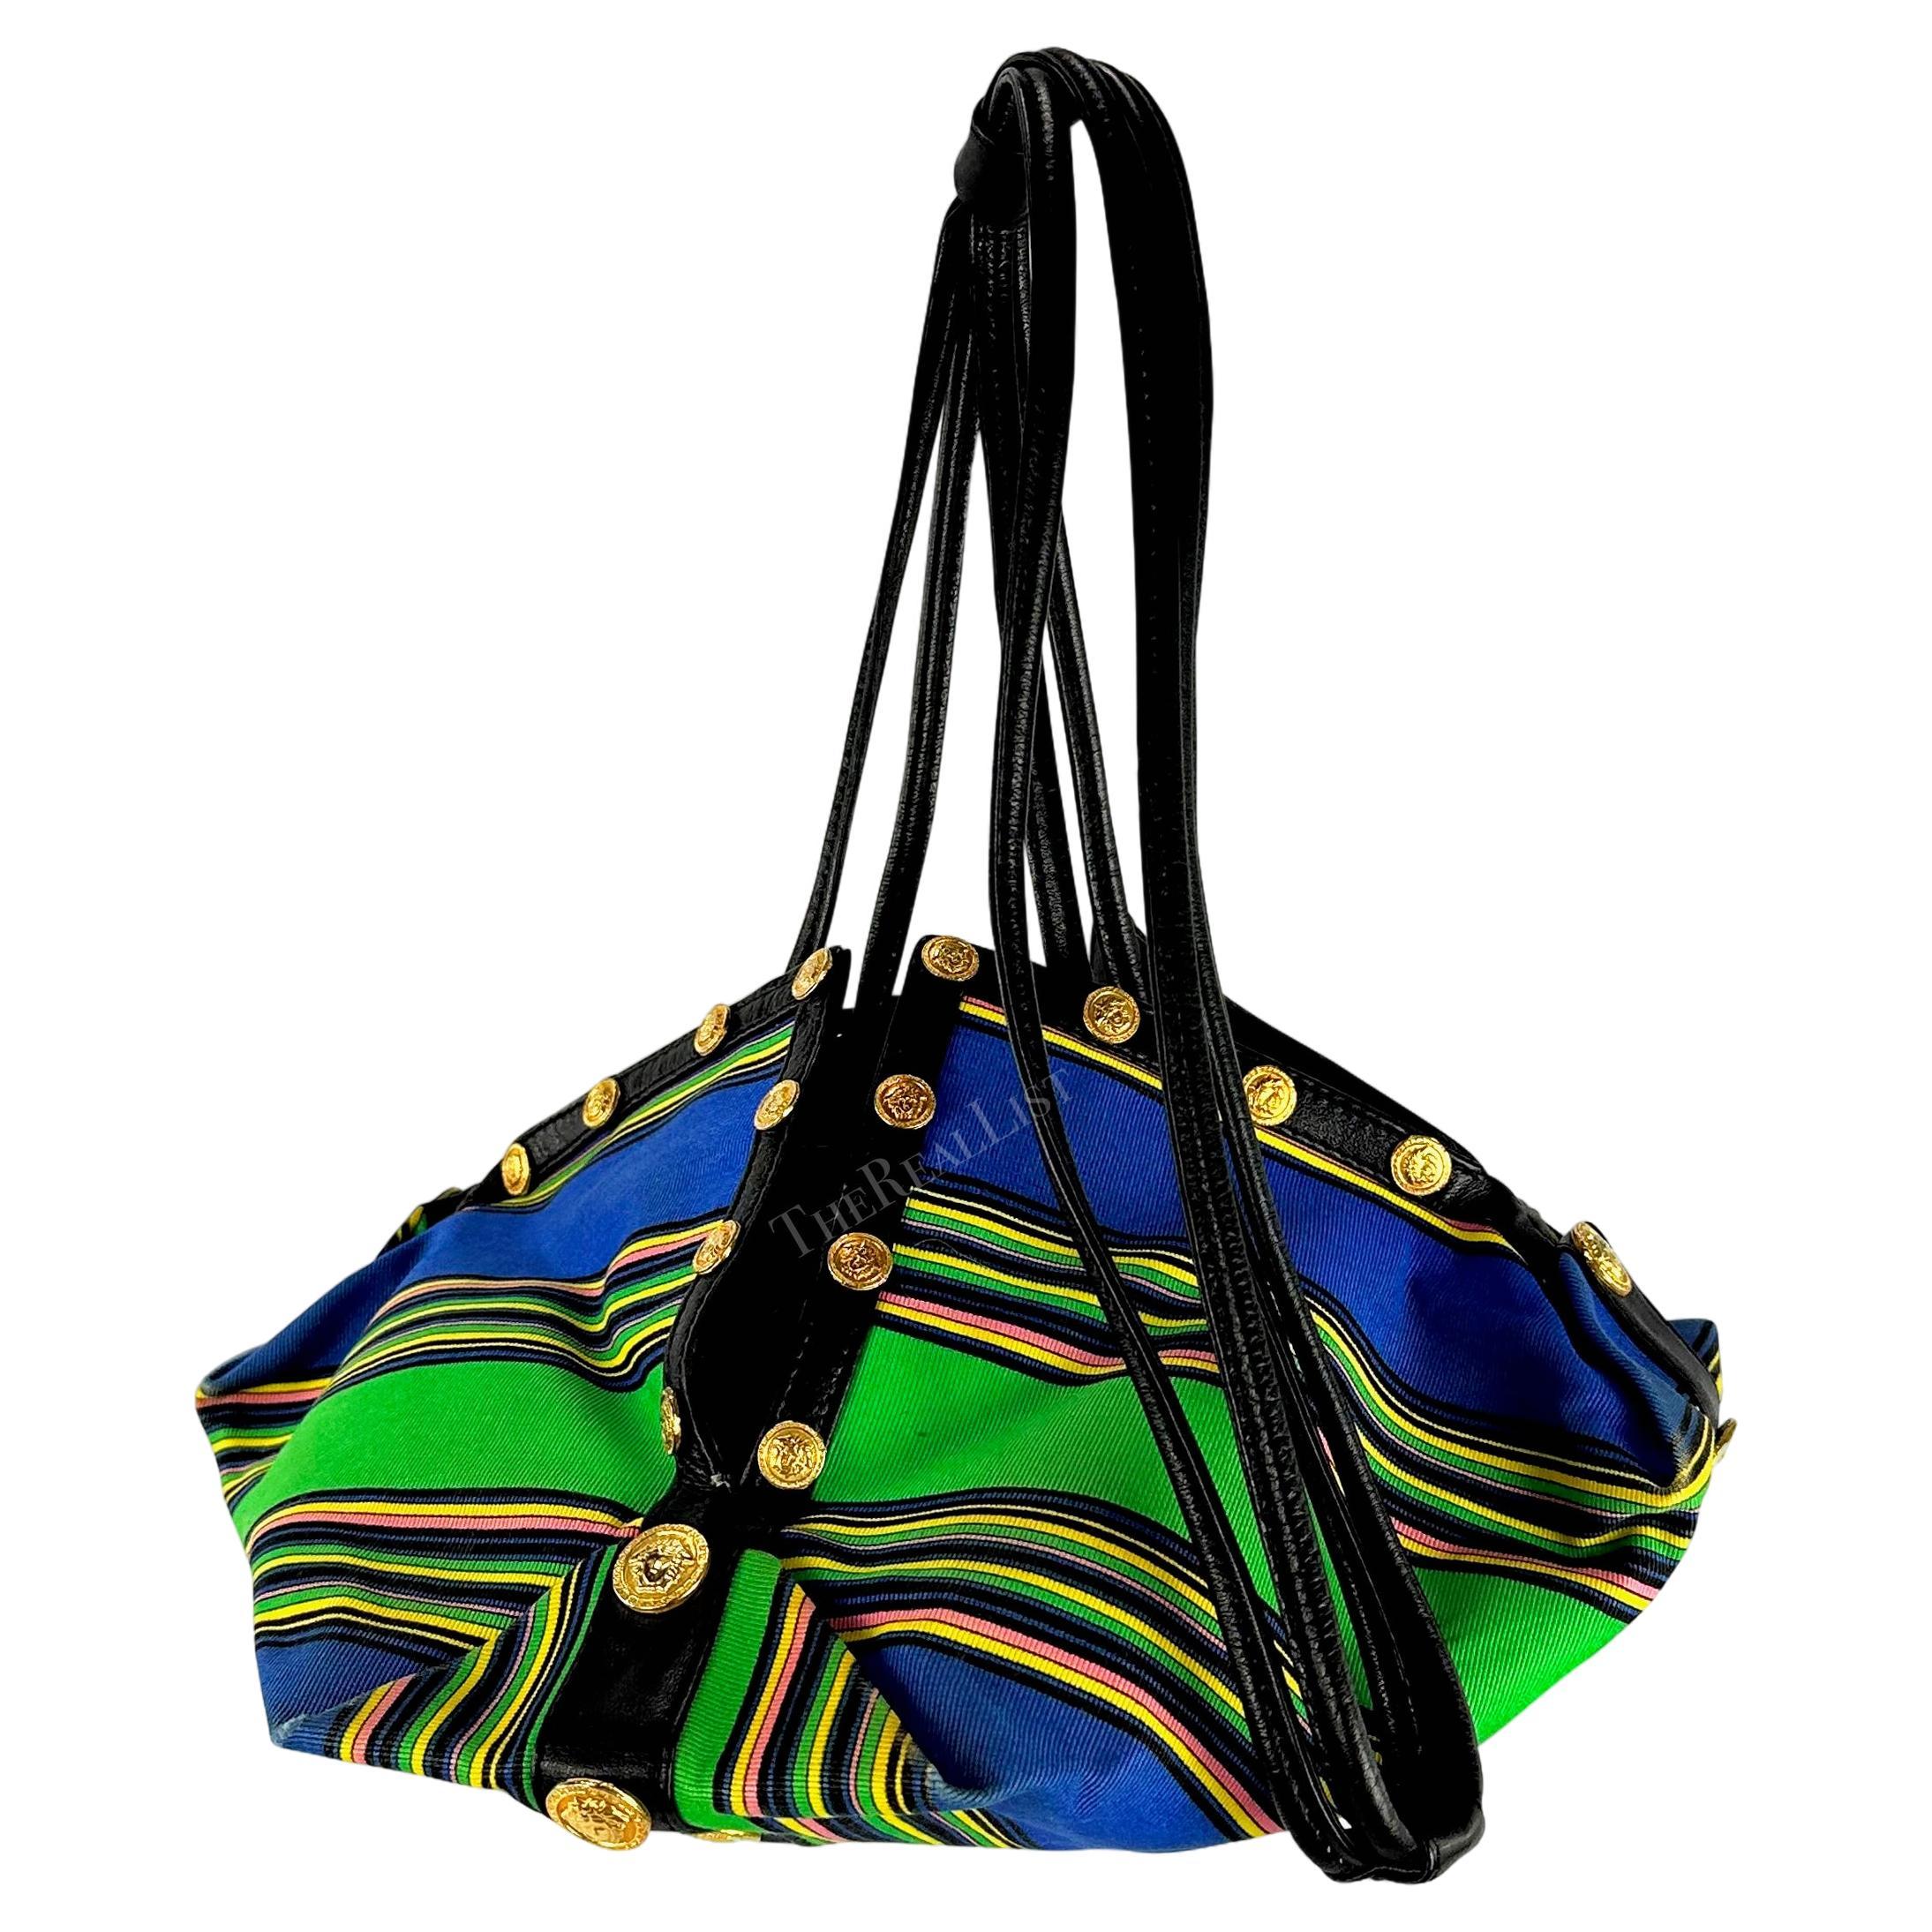 S/S 1993 Gianni Versace Runway Medusa Medallion Blue Striped Drawstring Bag In Good Condition For Sale In West Hollywood, CA